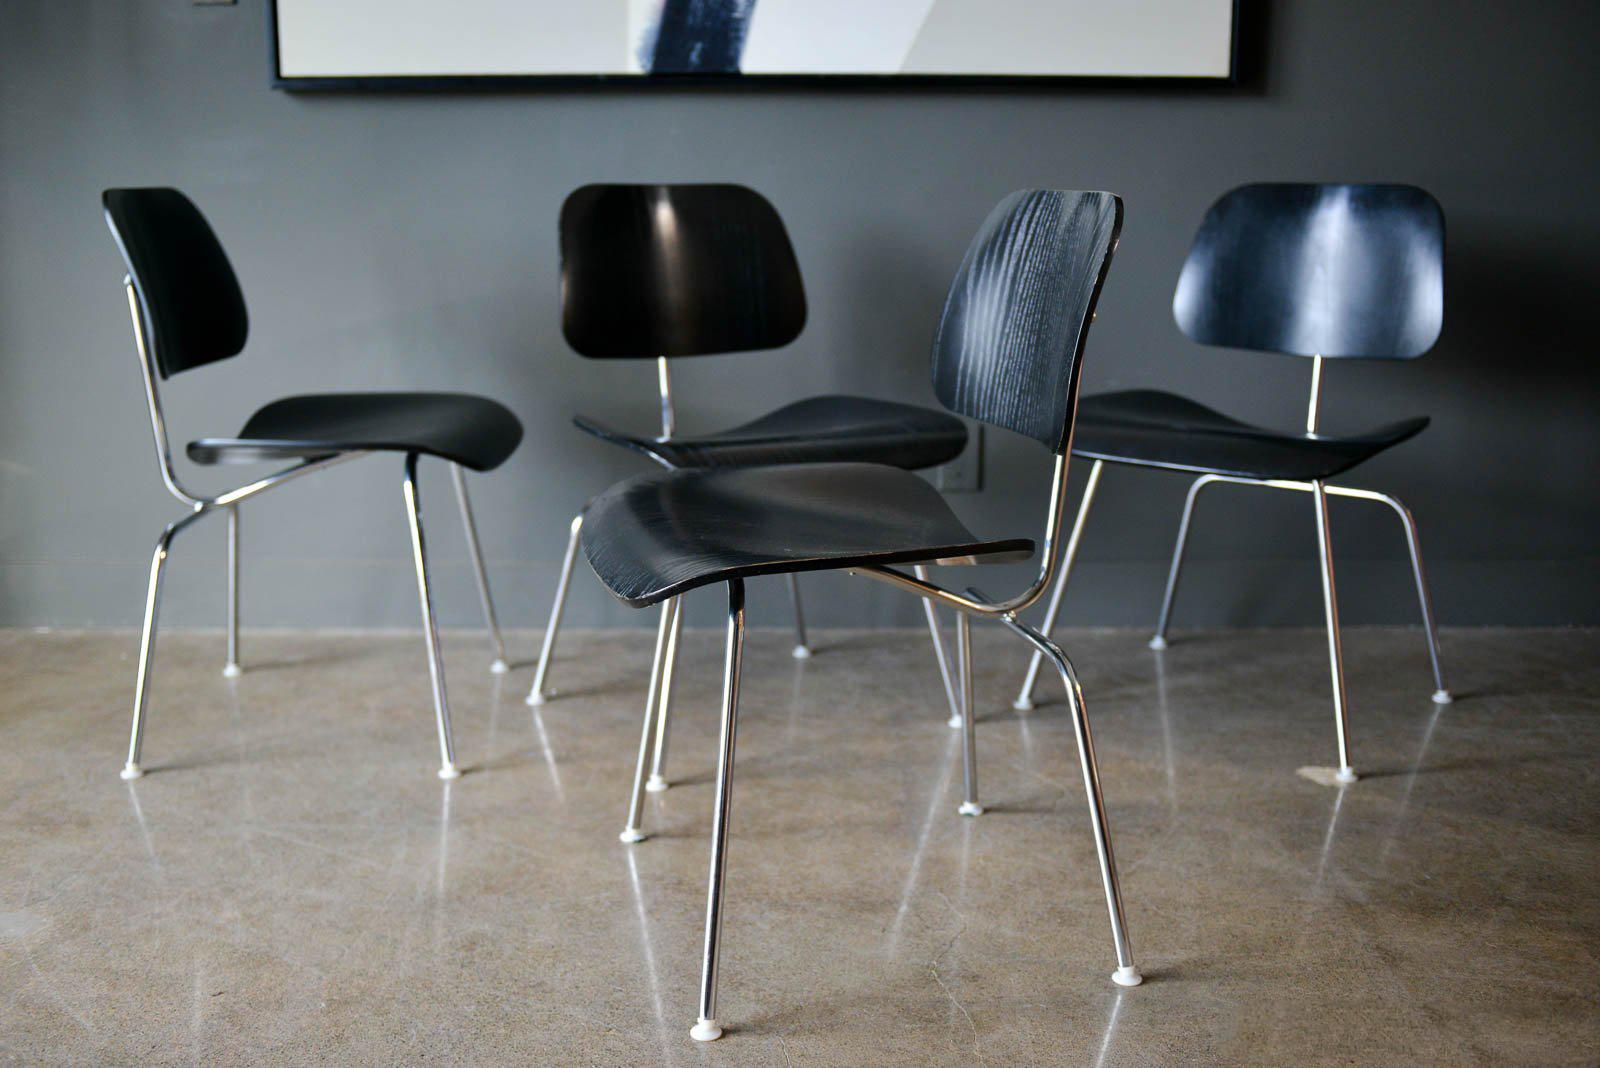 Set of 4 ebonized Eames DCM chairs, 2004. Excellent original condition with only slight wear to some of the edges. Ebonized finish with original floor glides. Marked with Herman Miller label, 2004.